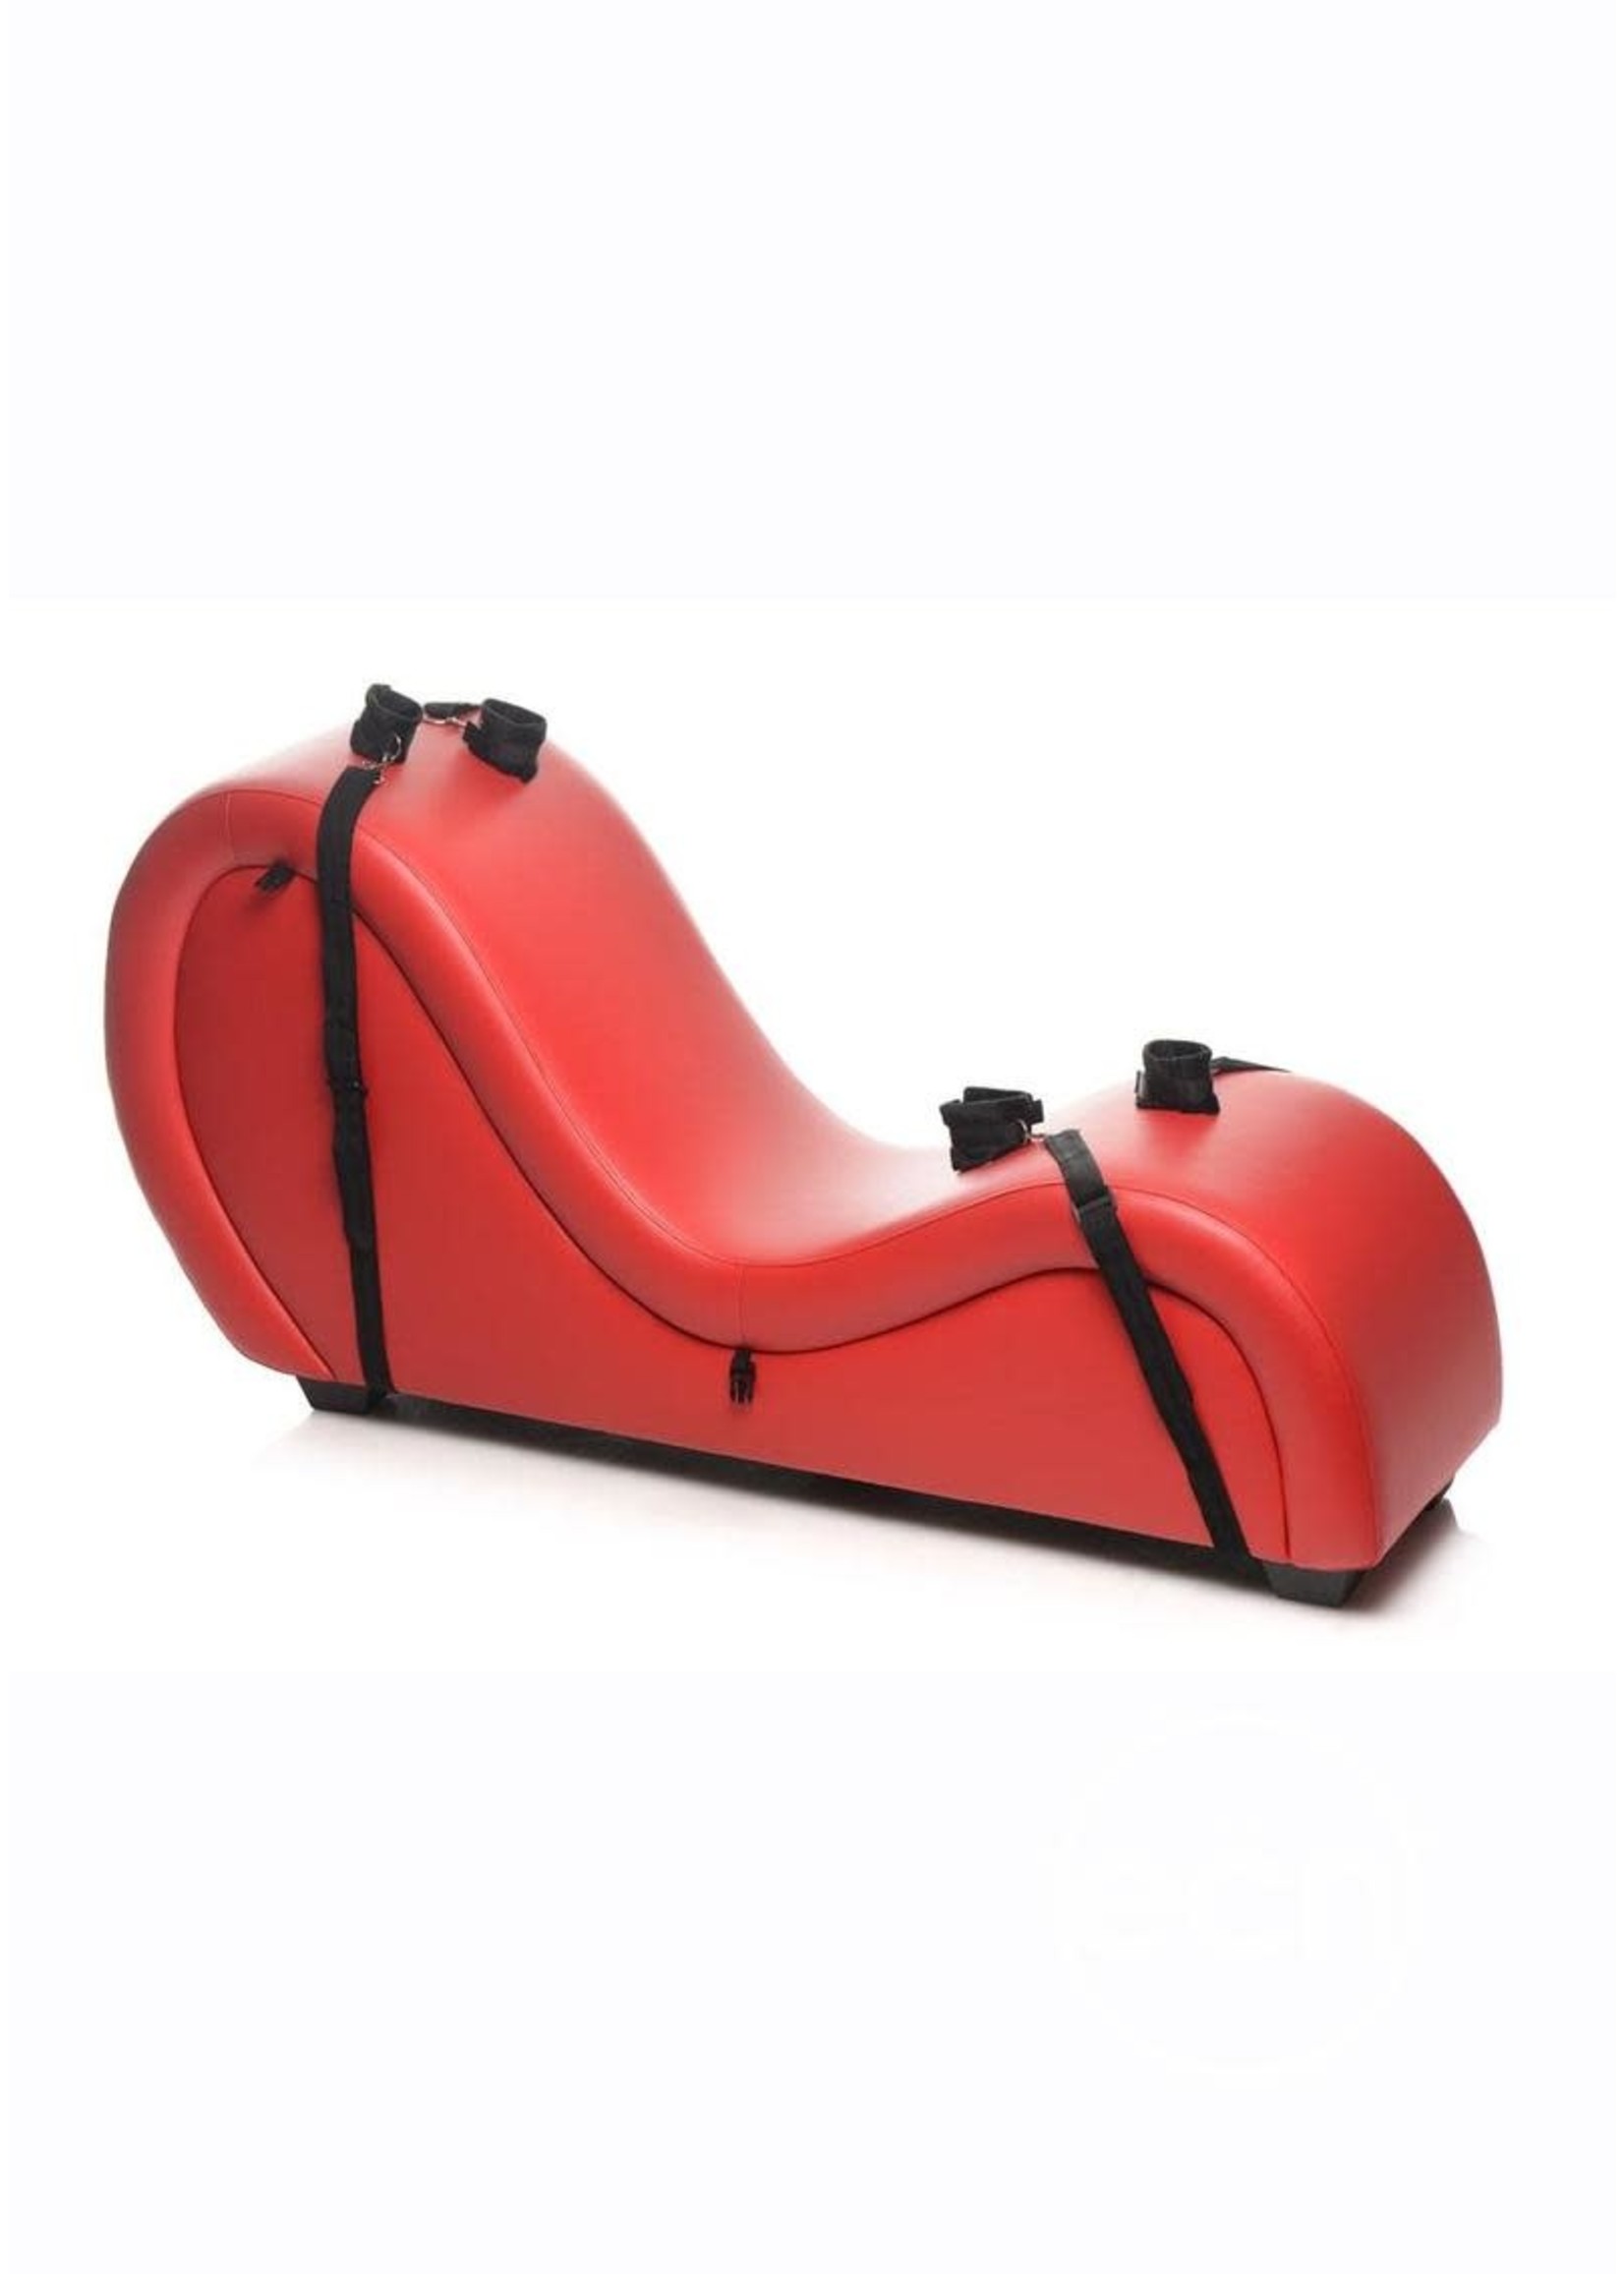 XR Brands Master Series Kinky Couch Sex Lounge Chair - Red